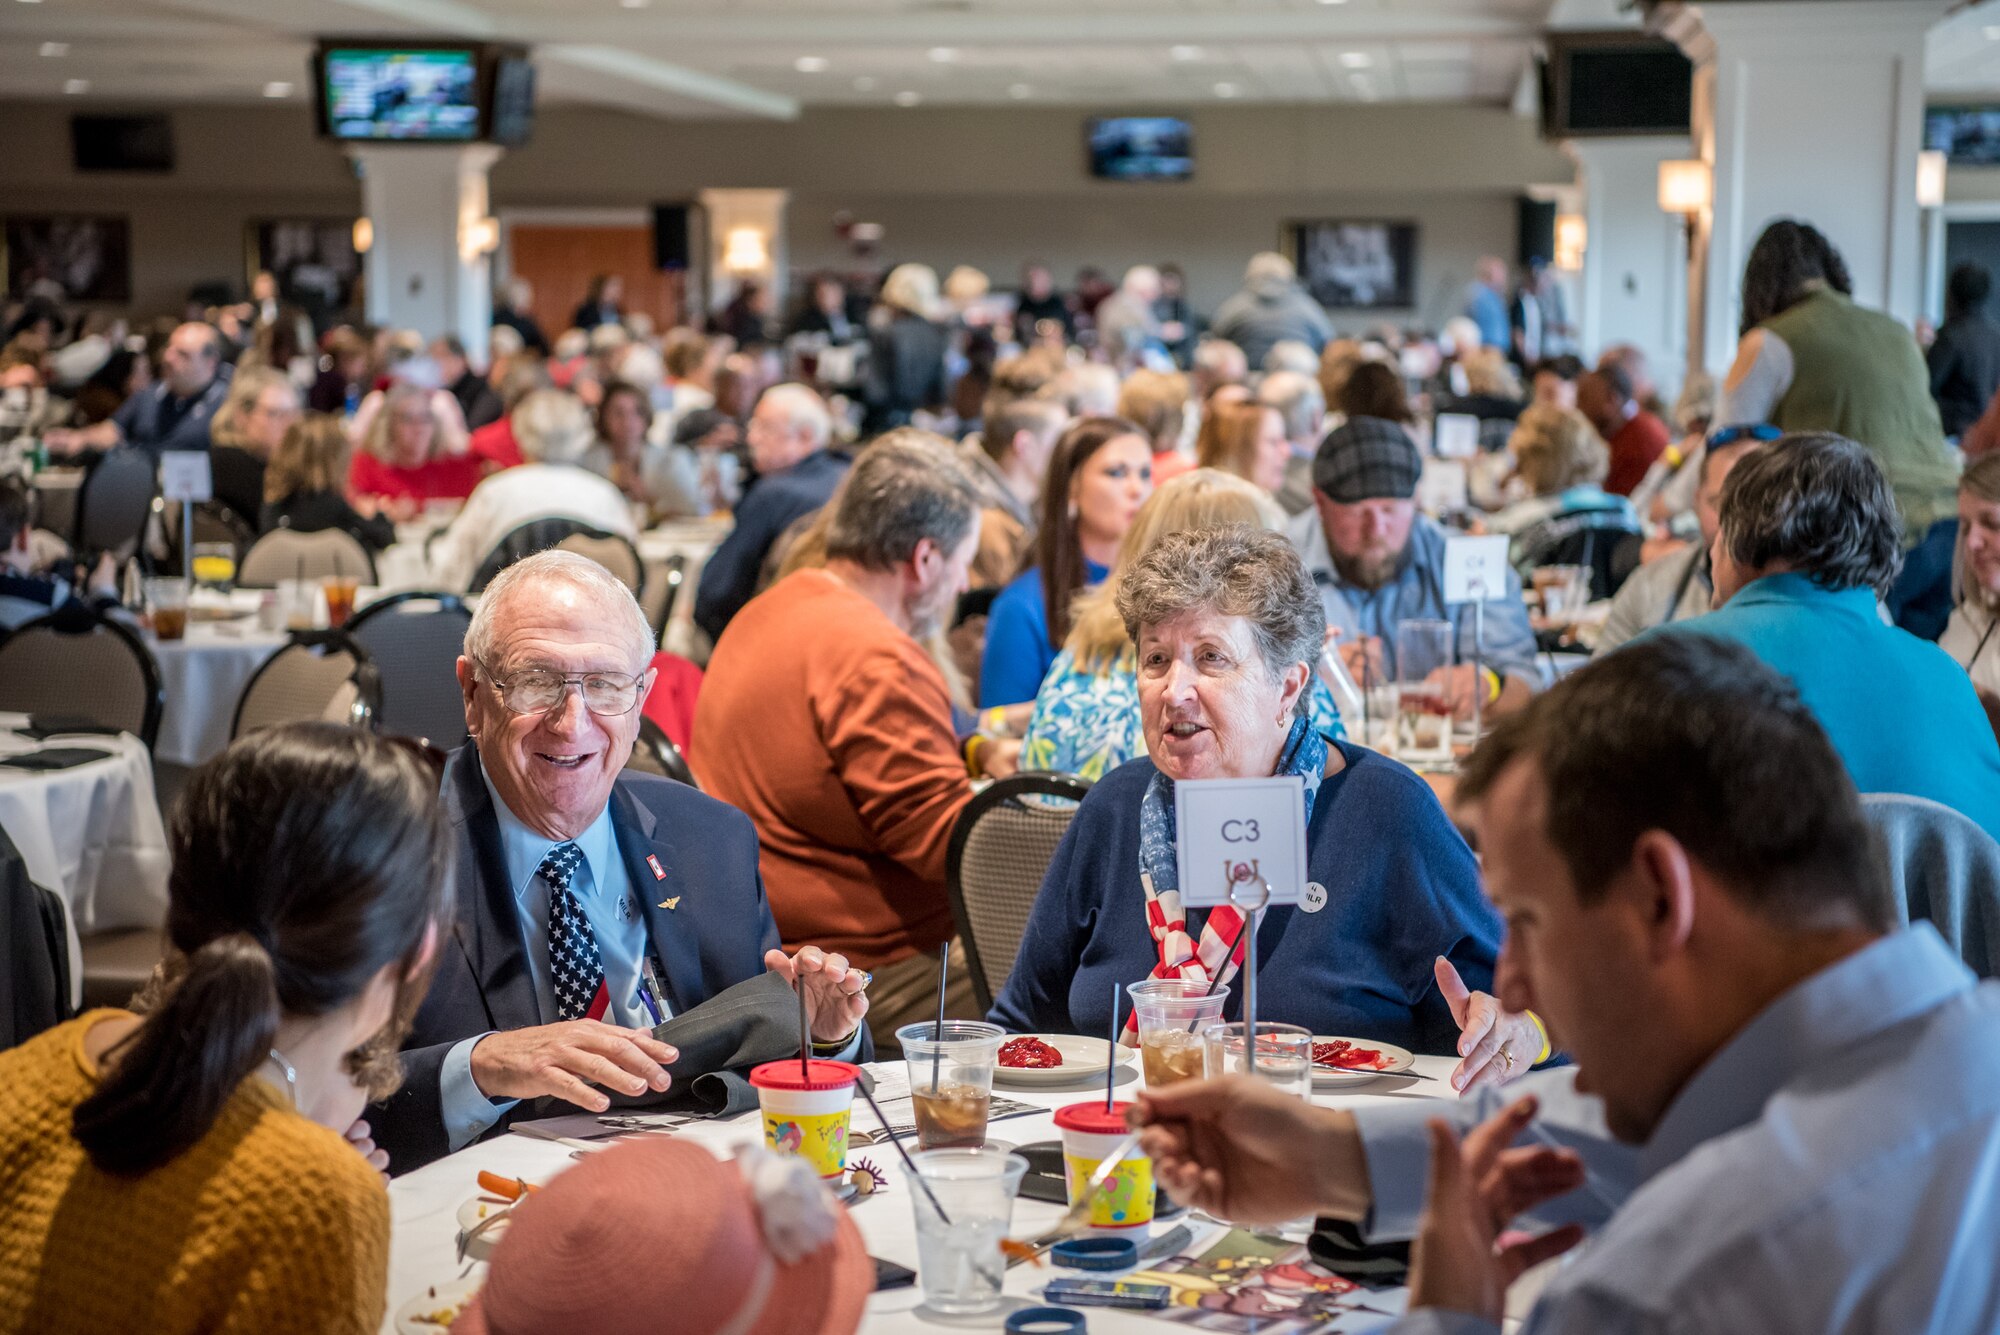 Gold Star family members participate in a day of fellowship and healing at the tenth annual Survivors Day at the Races at Churchill Downs in Louisville, Ky., Nov. 3, 2019. The event is designed to recognize the surviving family members of military service members who have given their lives in defense of our nation. (U.S. Air National Guard photo by Staff Sgt. Joshua Horton)